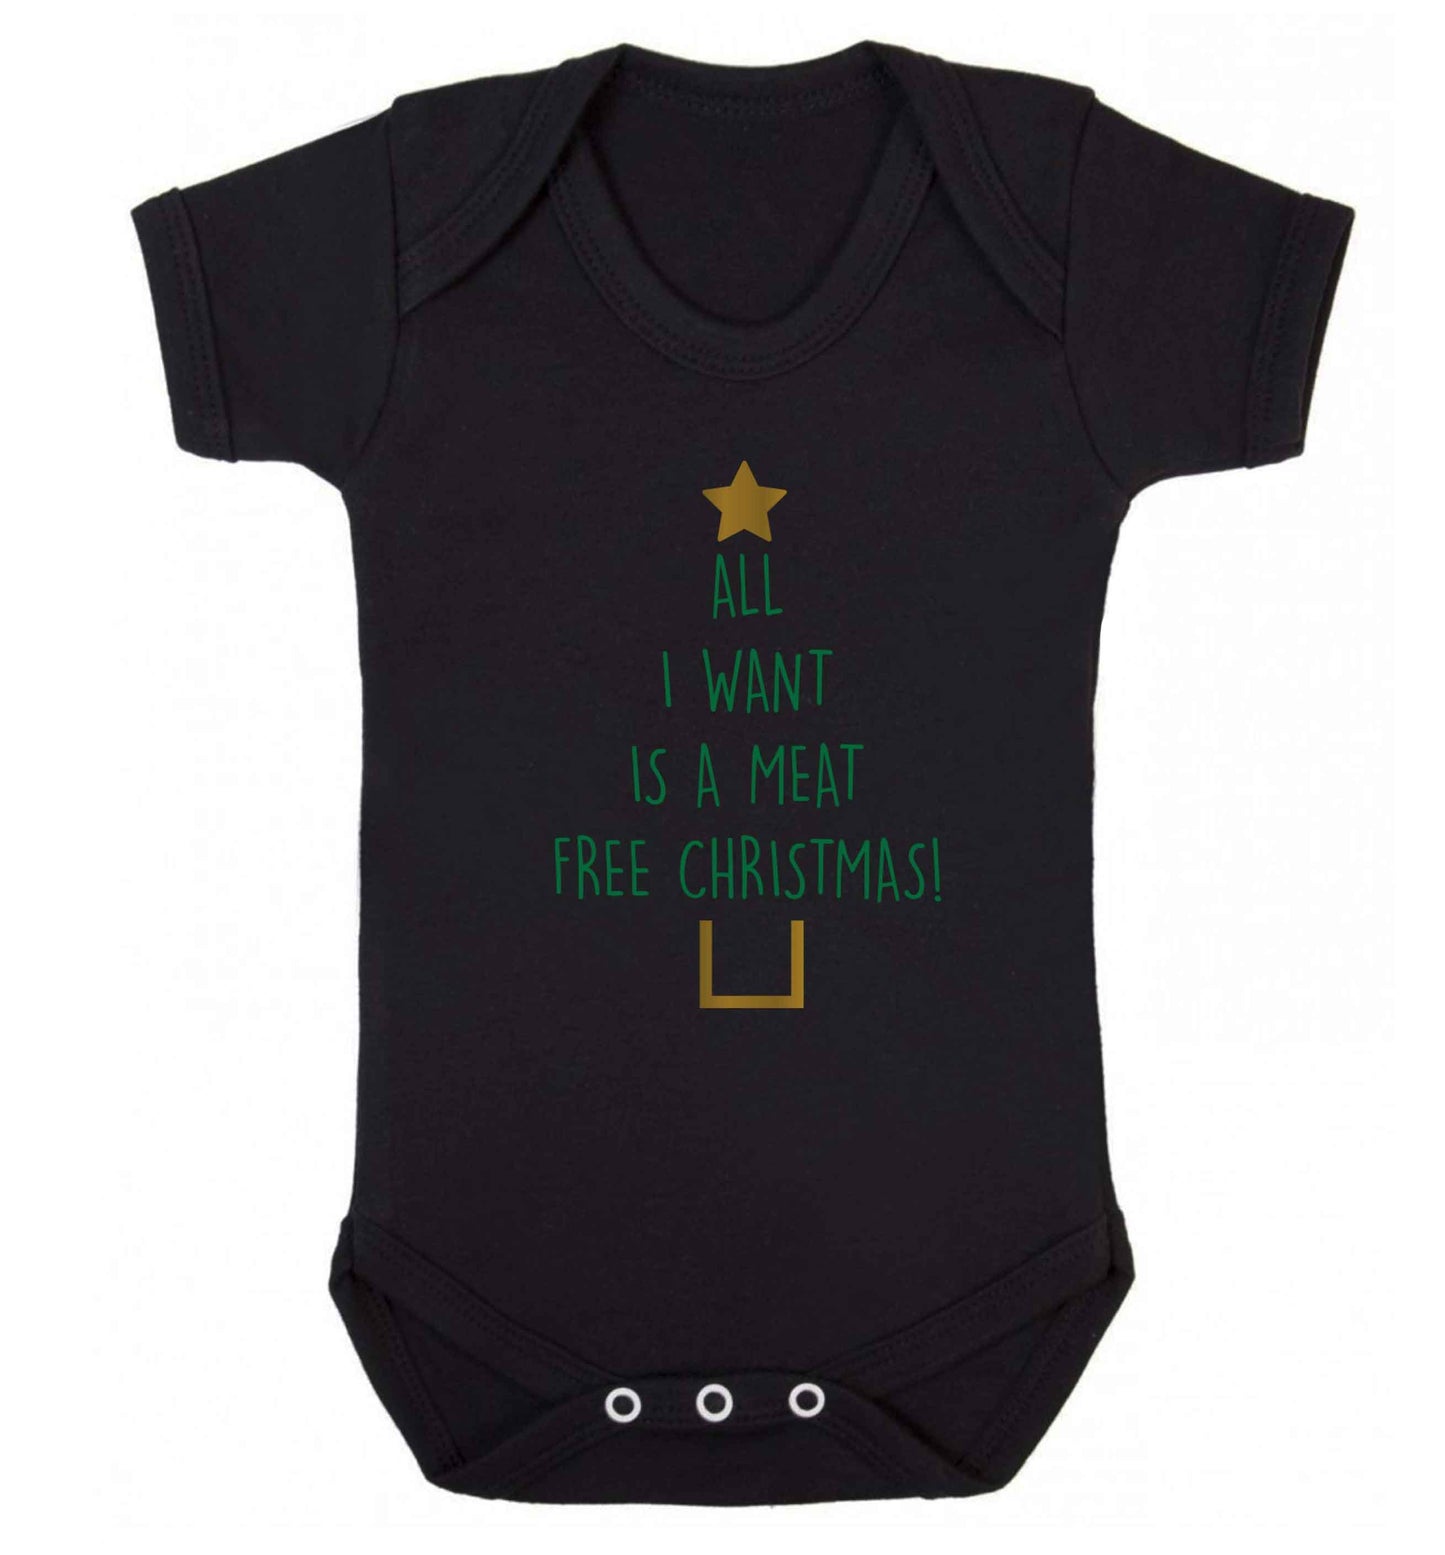 All I want is a meat free Christmas Baby Vest black 18-24 months